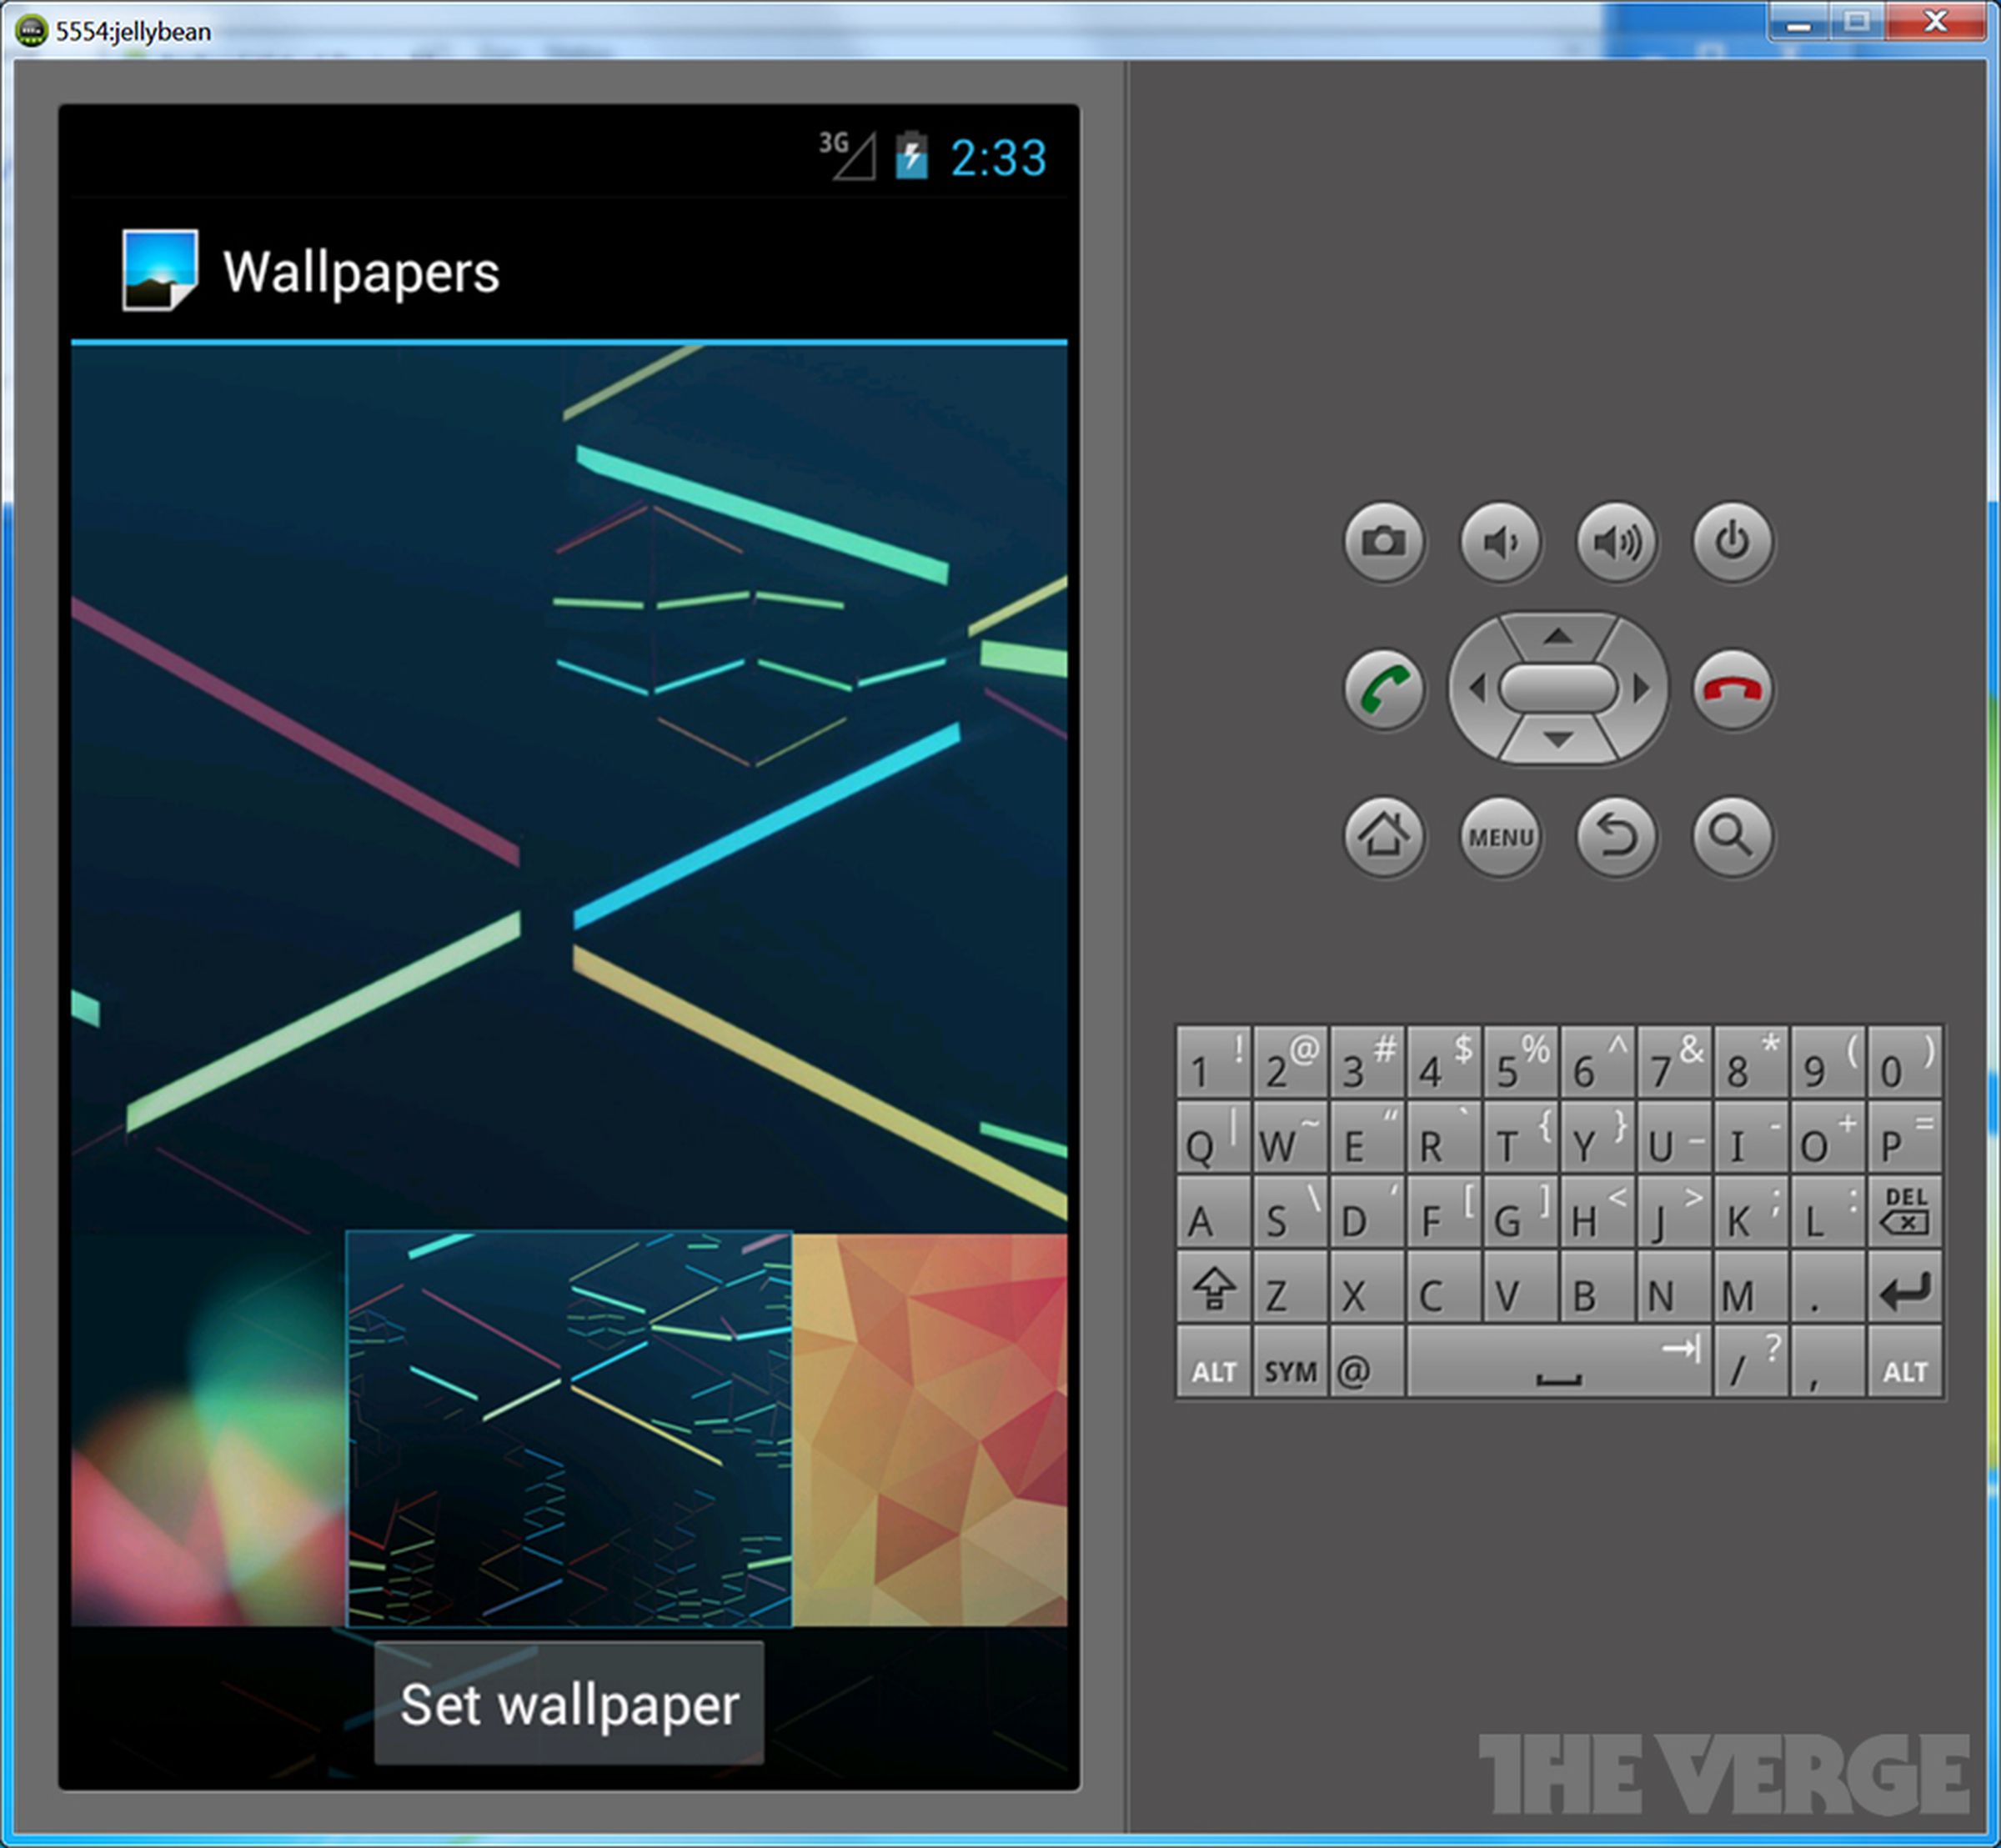 Android 4.1 Jelly Bean emulator in pictures